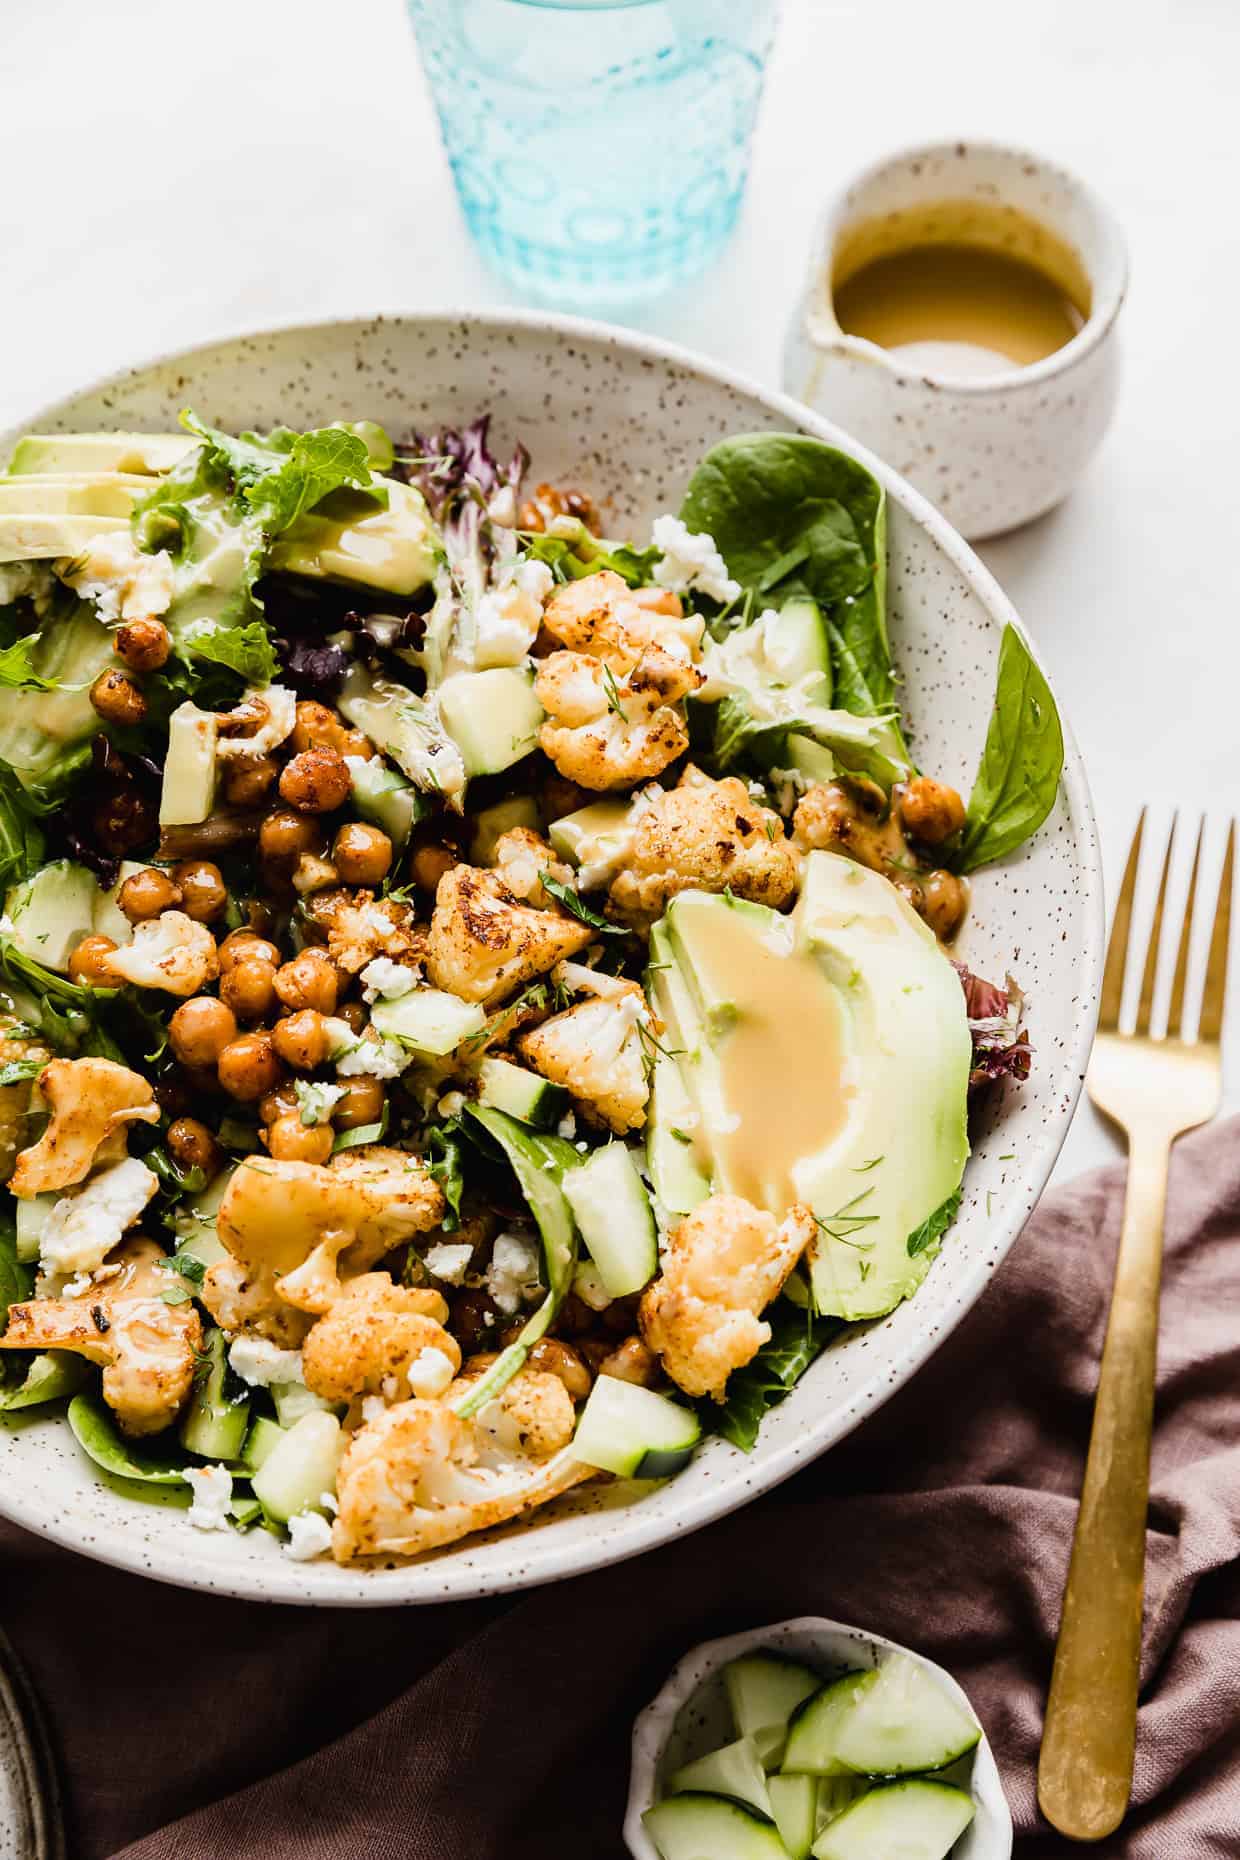 A salad in bowl topped with roasted cauliflower, sliced avocado, roasted chickpeas and a creamy yellow dressing.